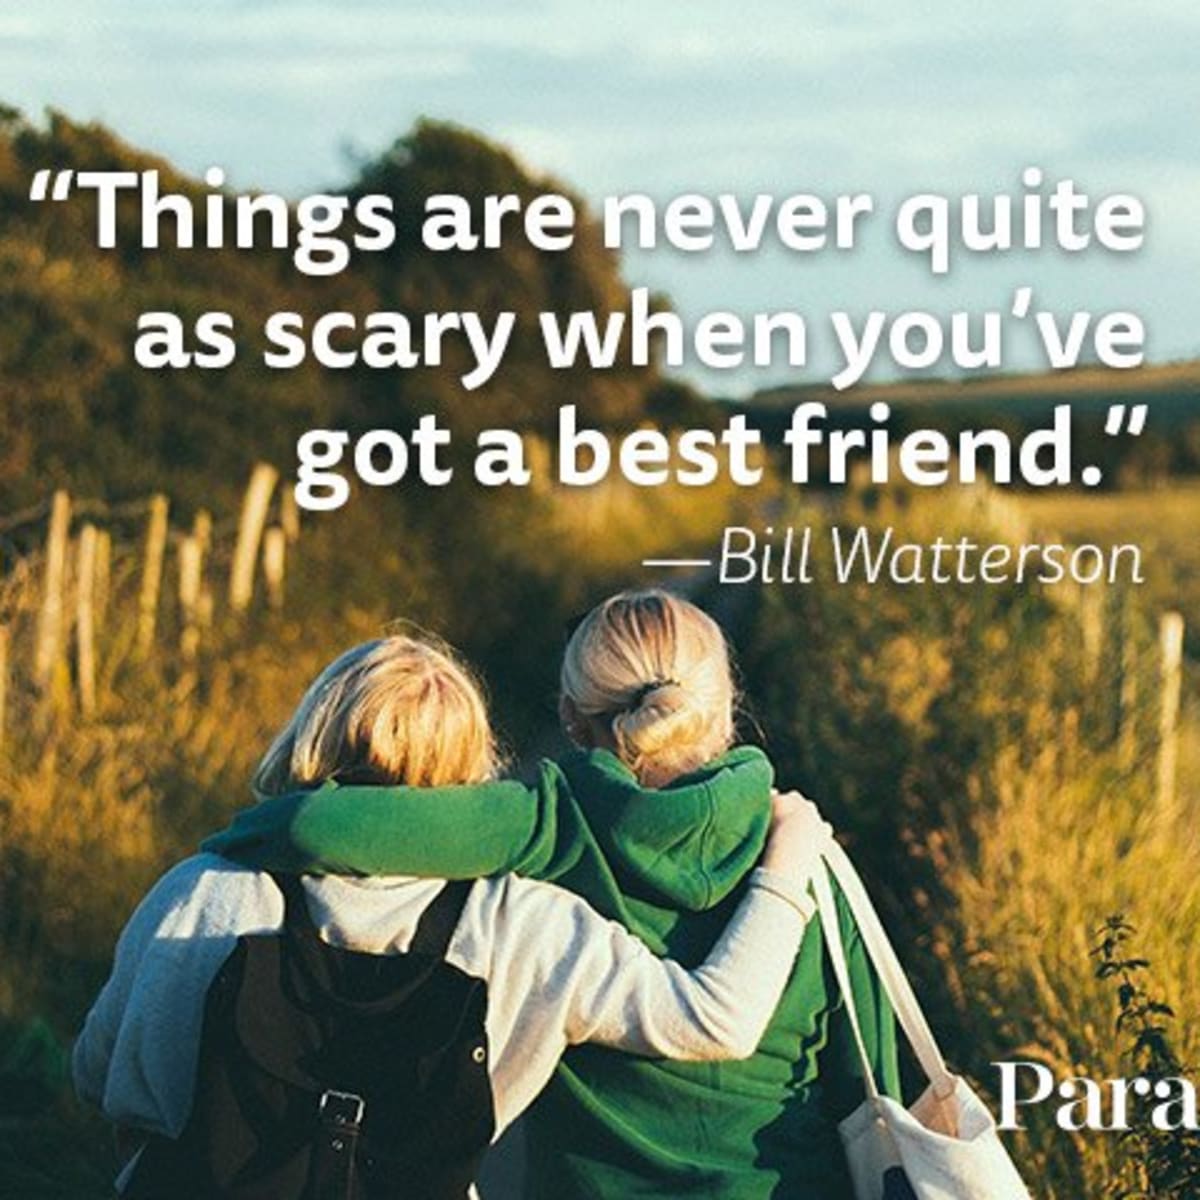 101 Best Friend Quotes To Celebrate Your Bff - Parade: Entertainment,  Recipes, Health, Life, Holidays